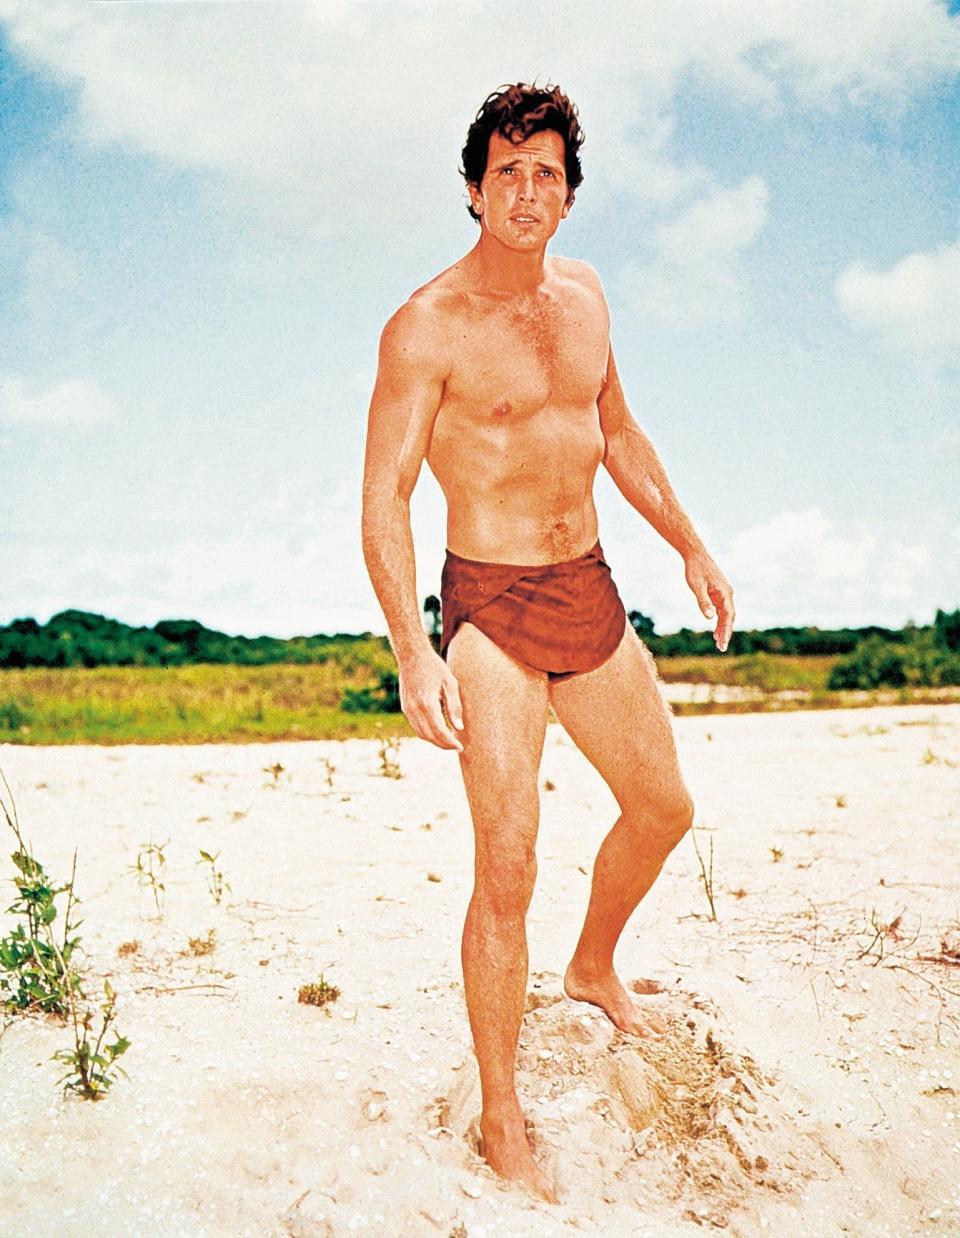 Actor Ron Ely playing the role of Tarzan in the 1966 TV series (PUBLICITY PICTURE)